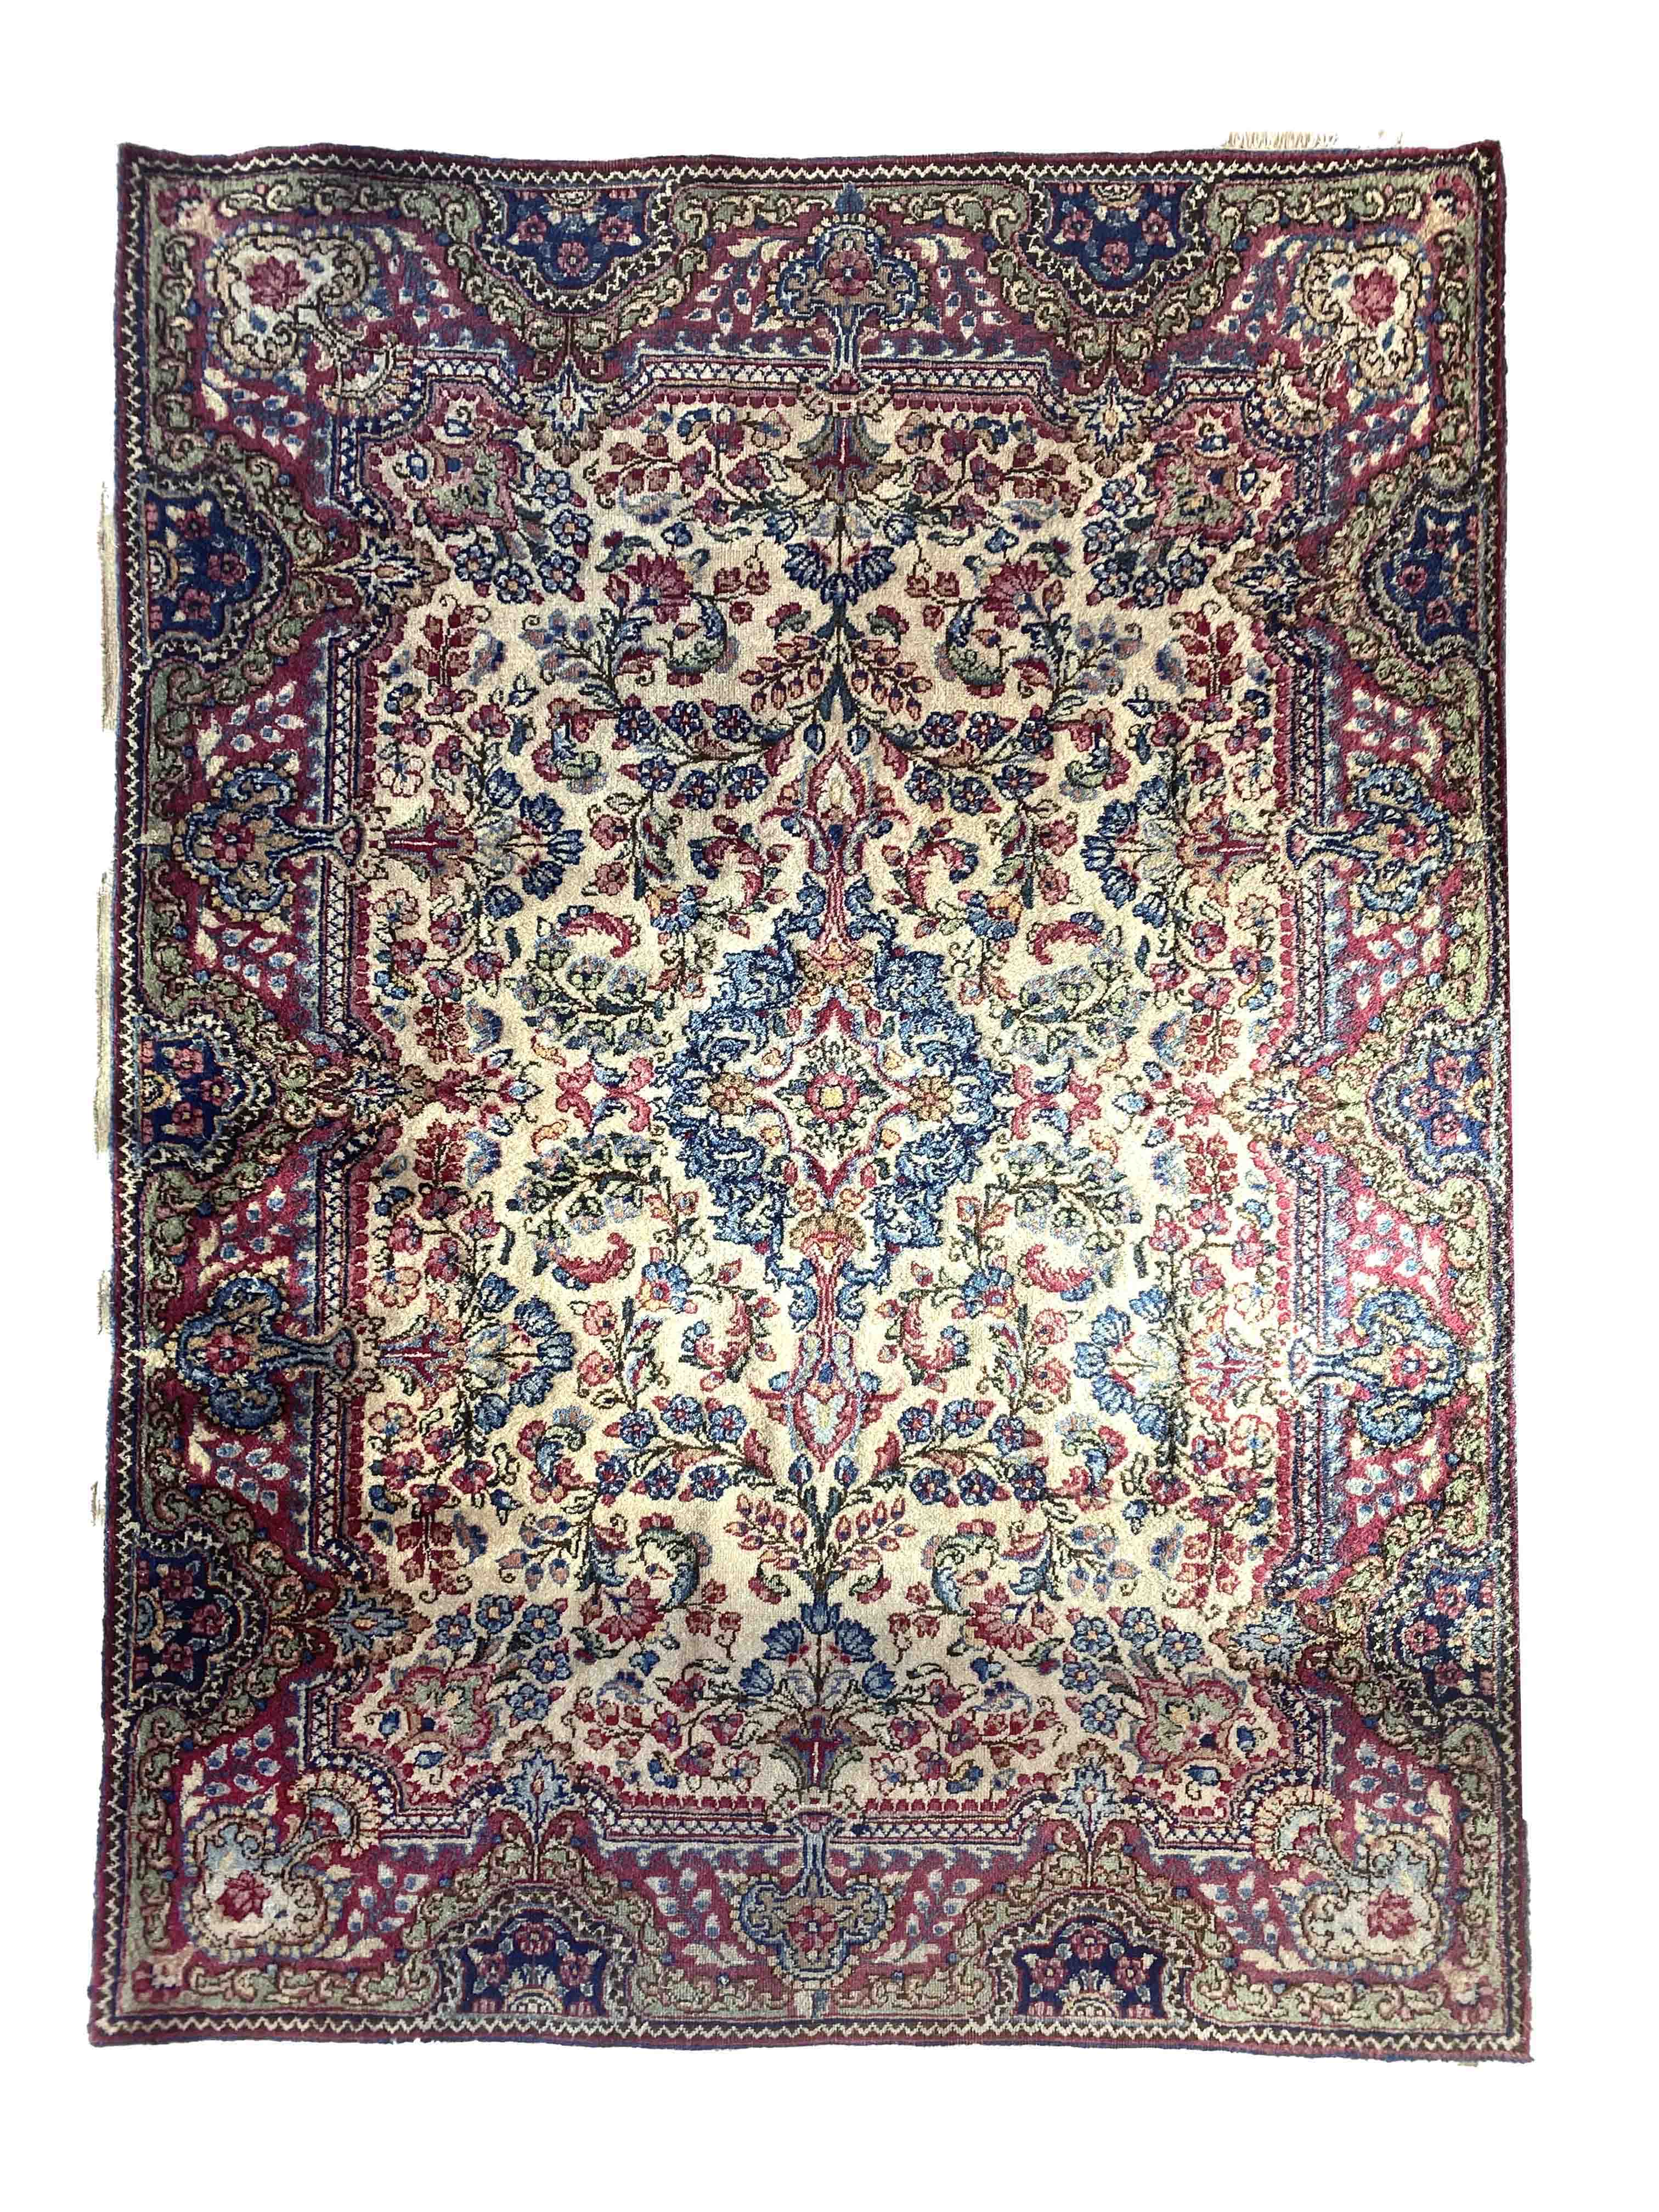 Carpet, Lawar, minor wear, 130 x 92 cm - The carpet can only be viewed and collected at another